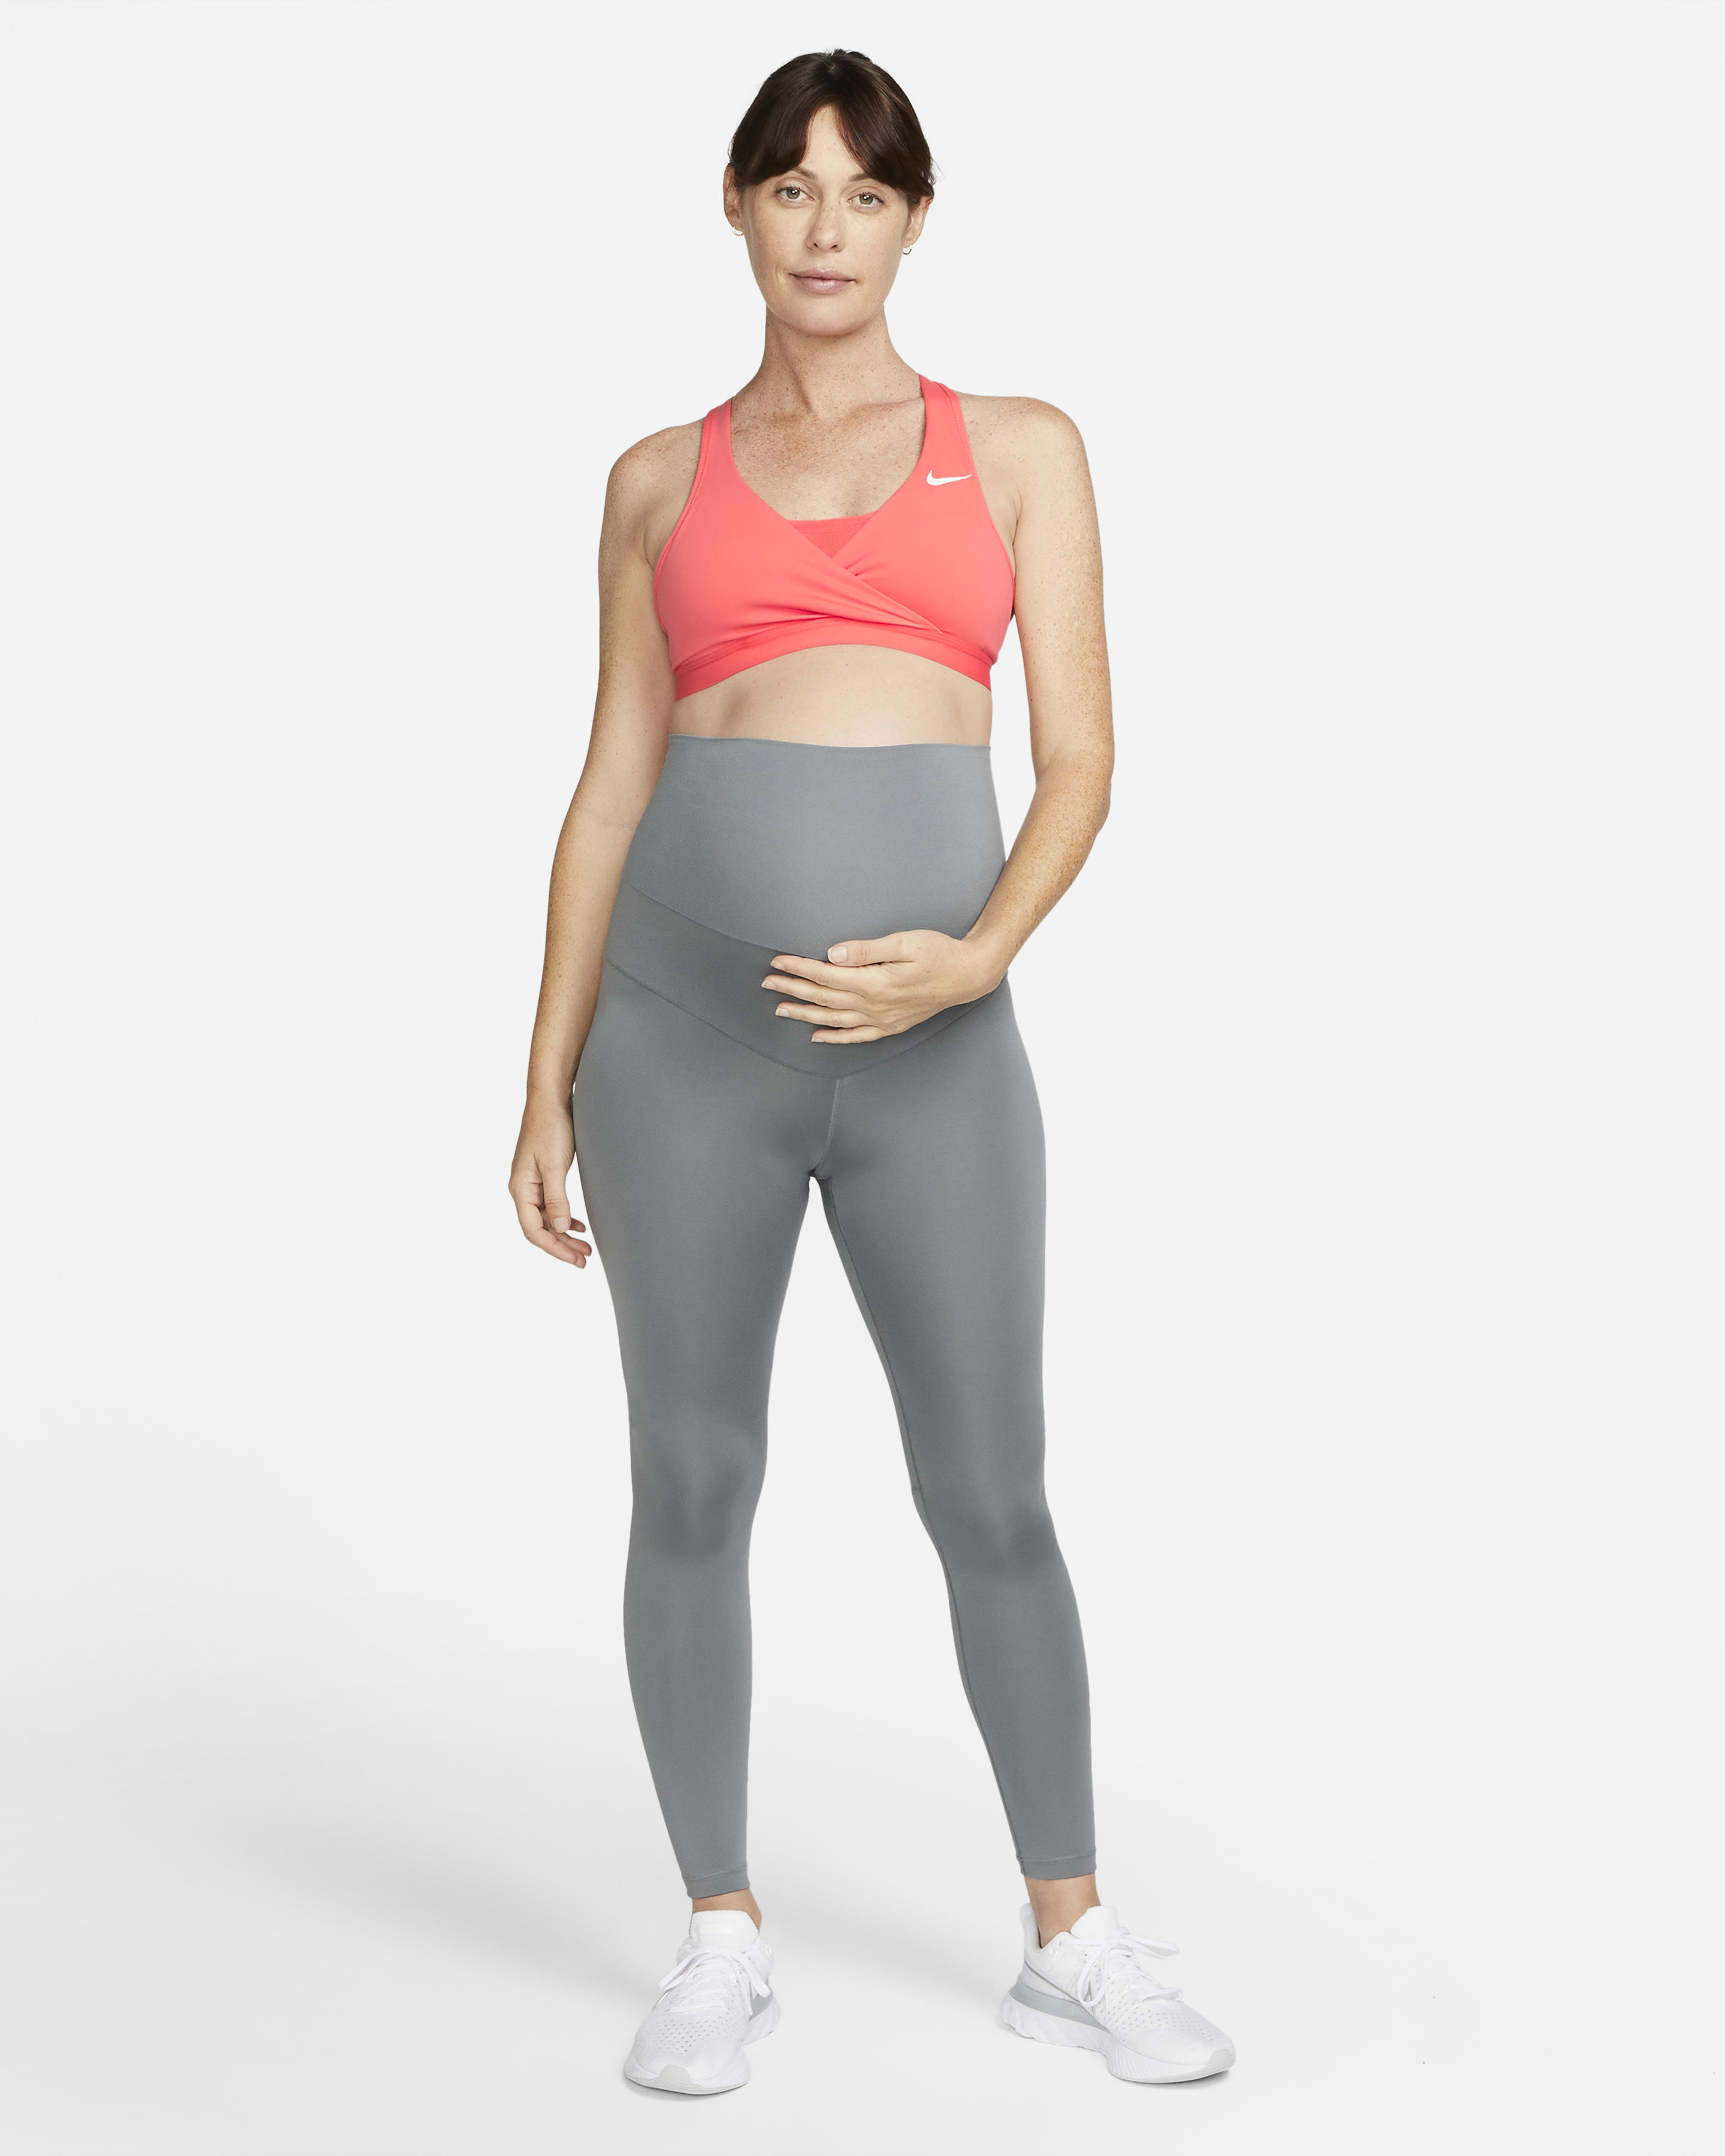 Best Maternity Workout Clothes: 26 Stylish Maternity Activewear Pieces